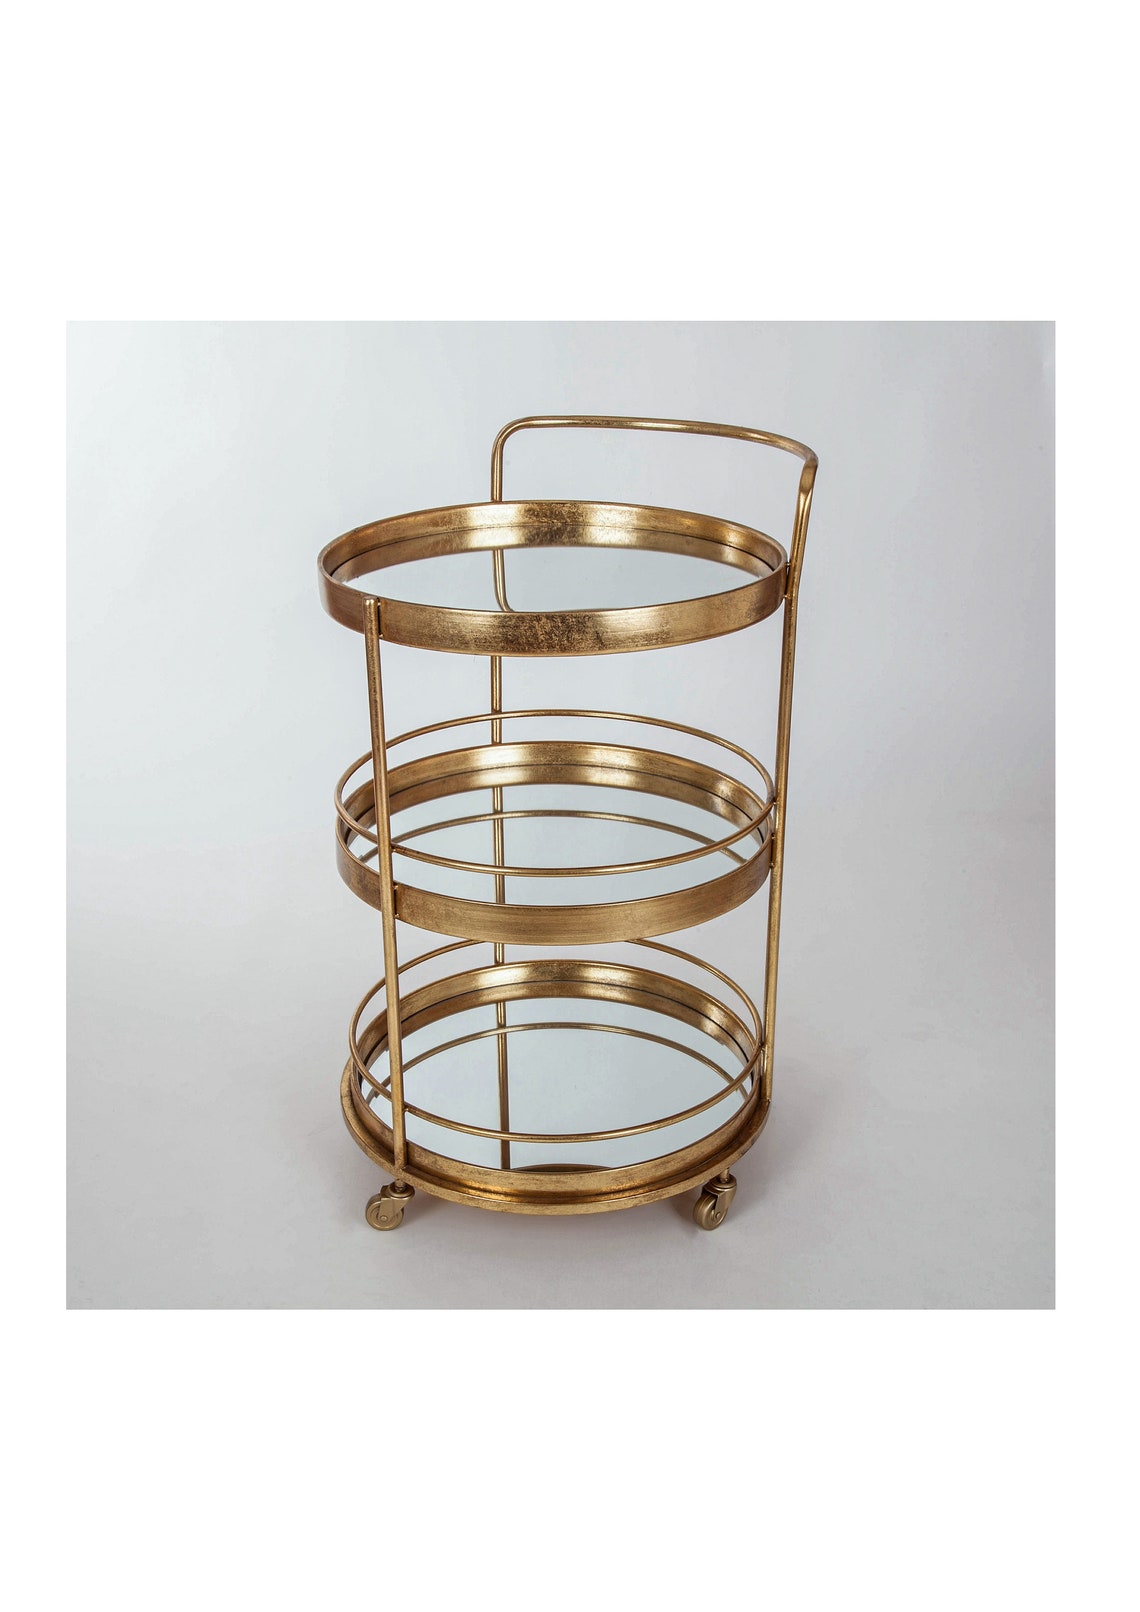 Glamourous Gold Gilt Leaf Drinks Trolley / Side table on wheels